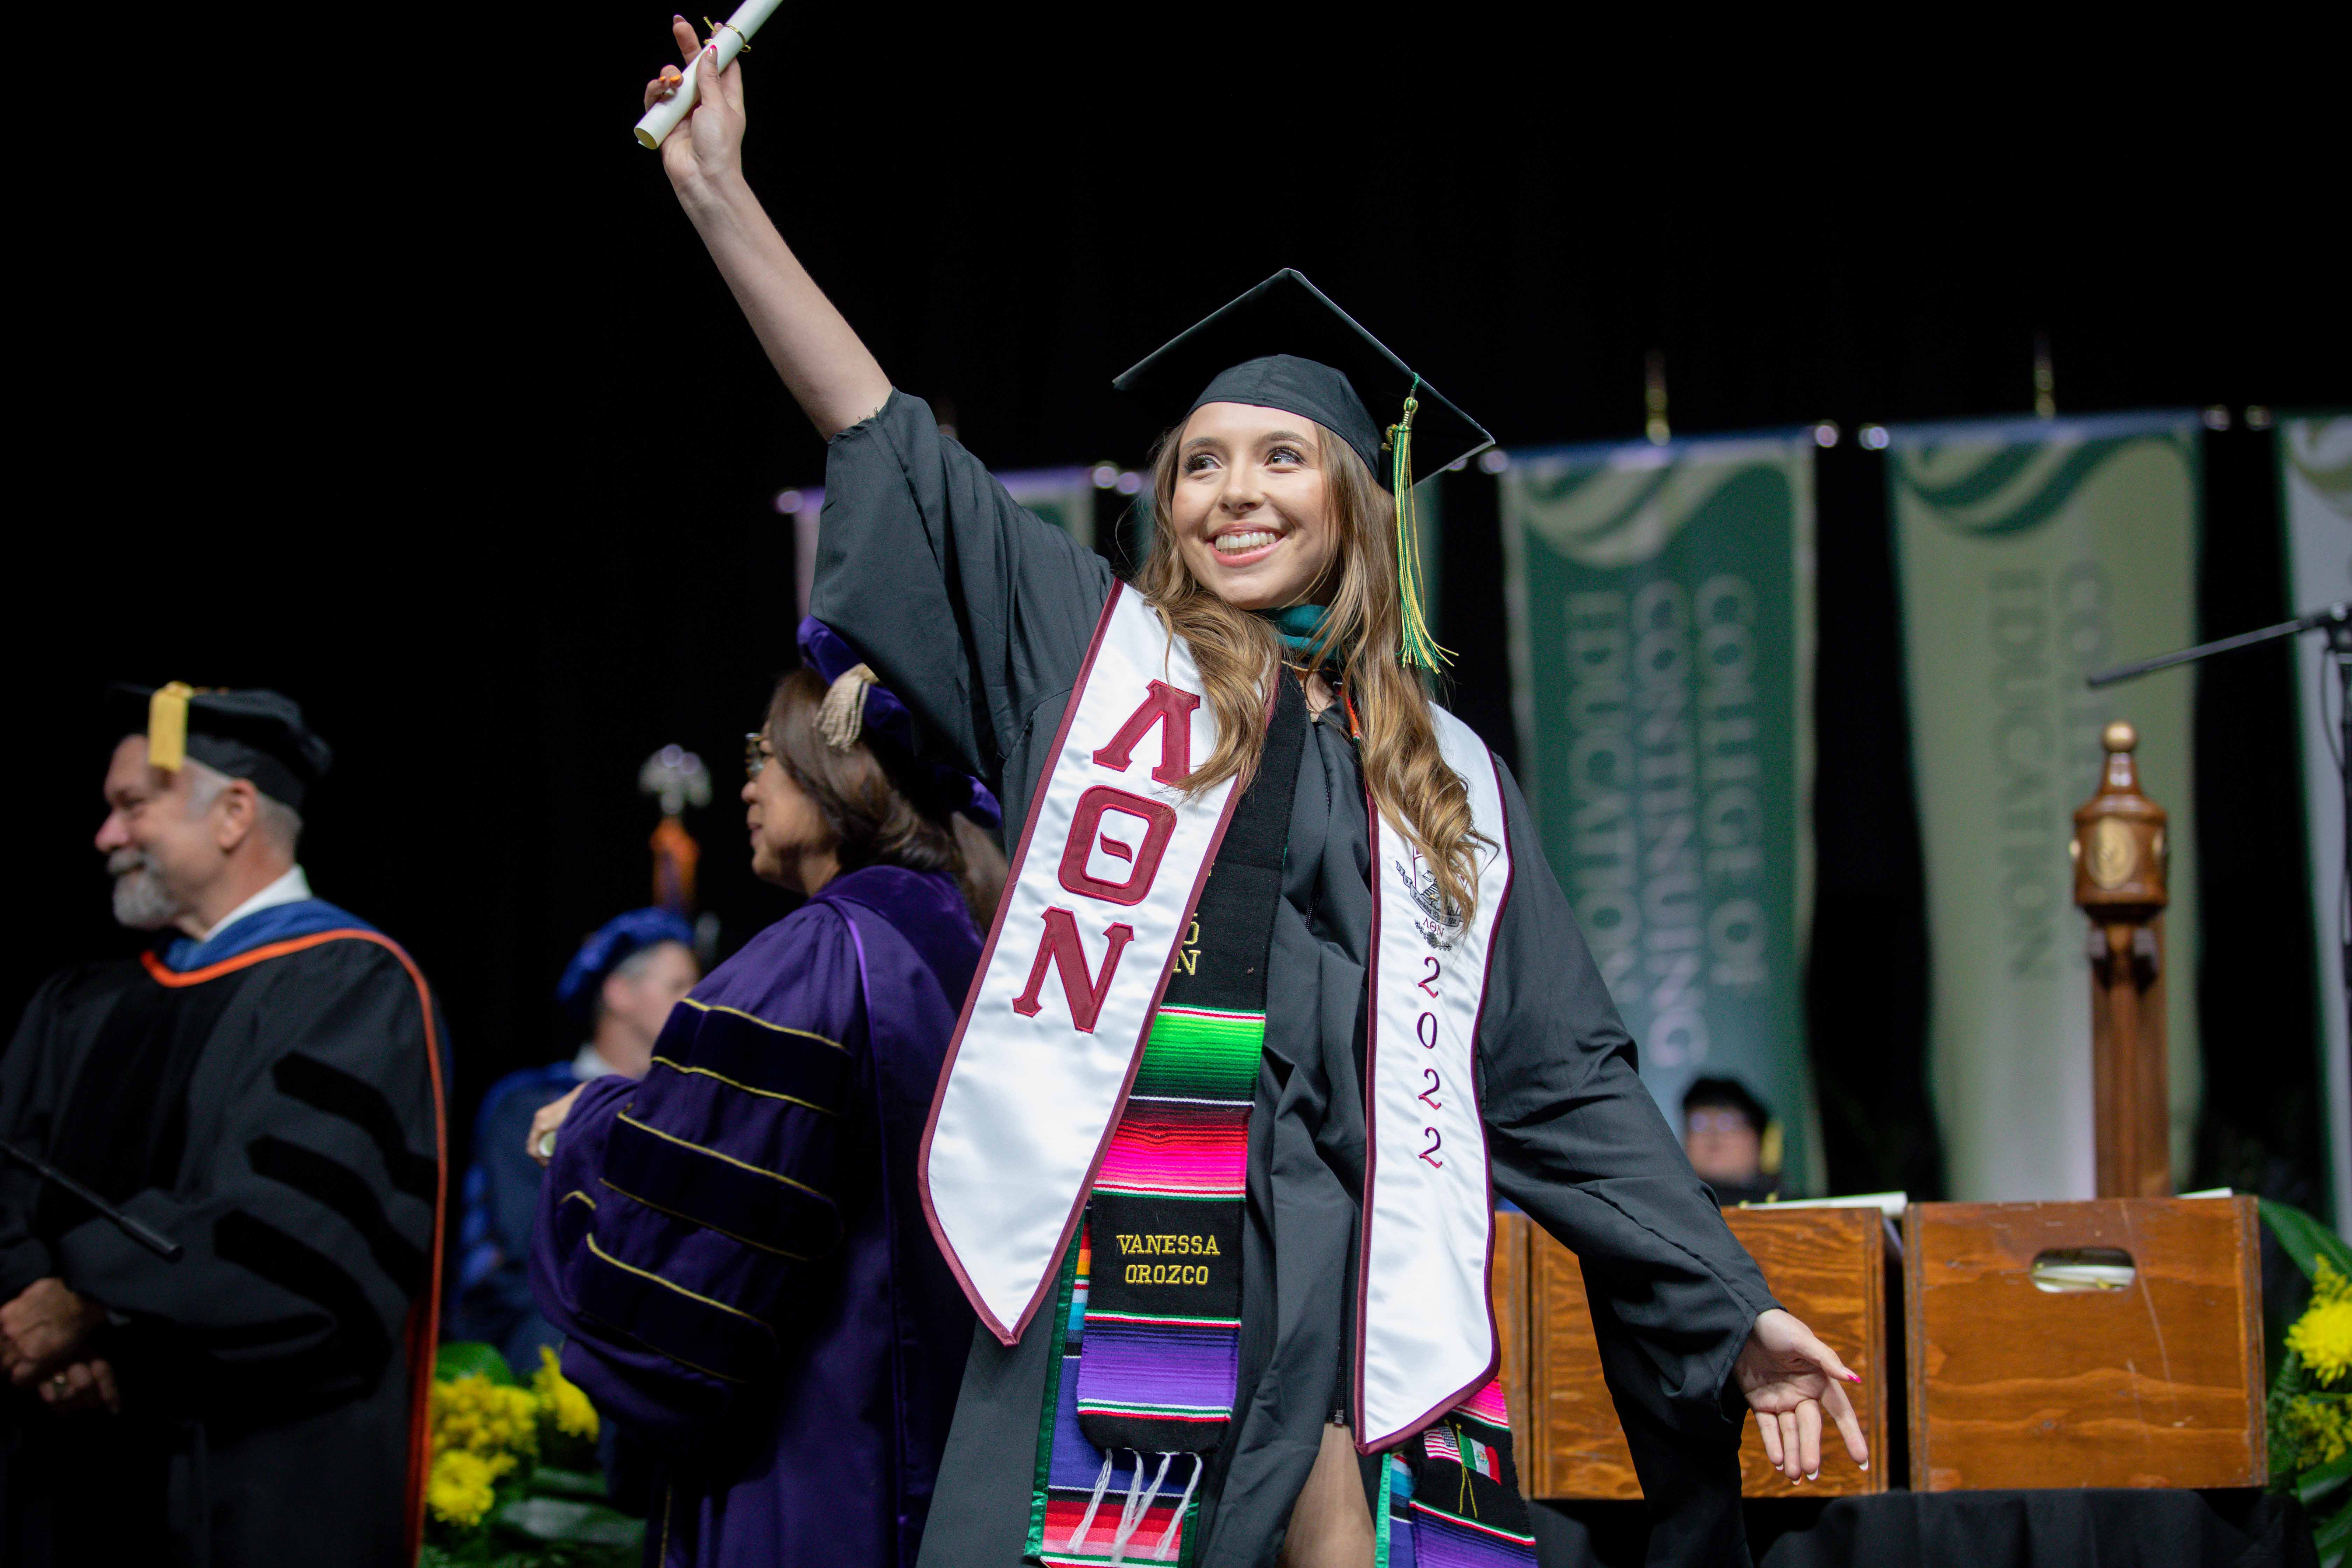 A woman in academic regalia, standing on the Commencement stage, smiling and holding her diploma aloft